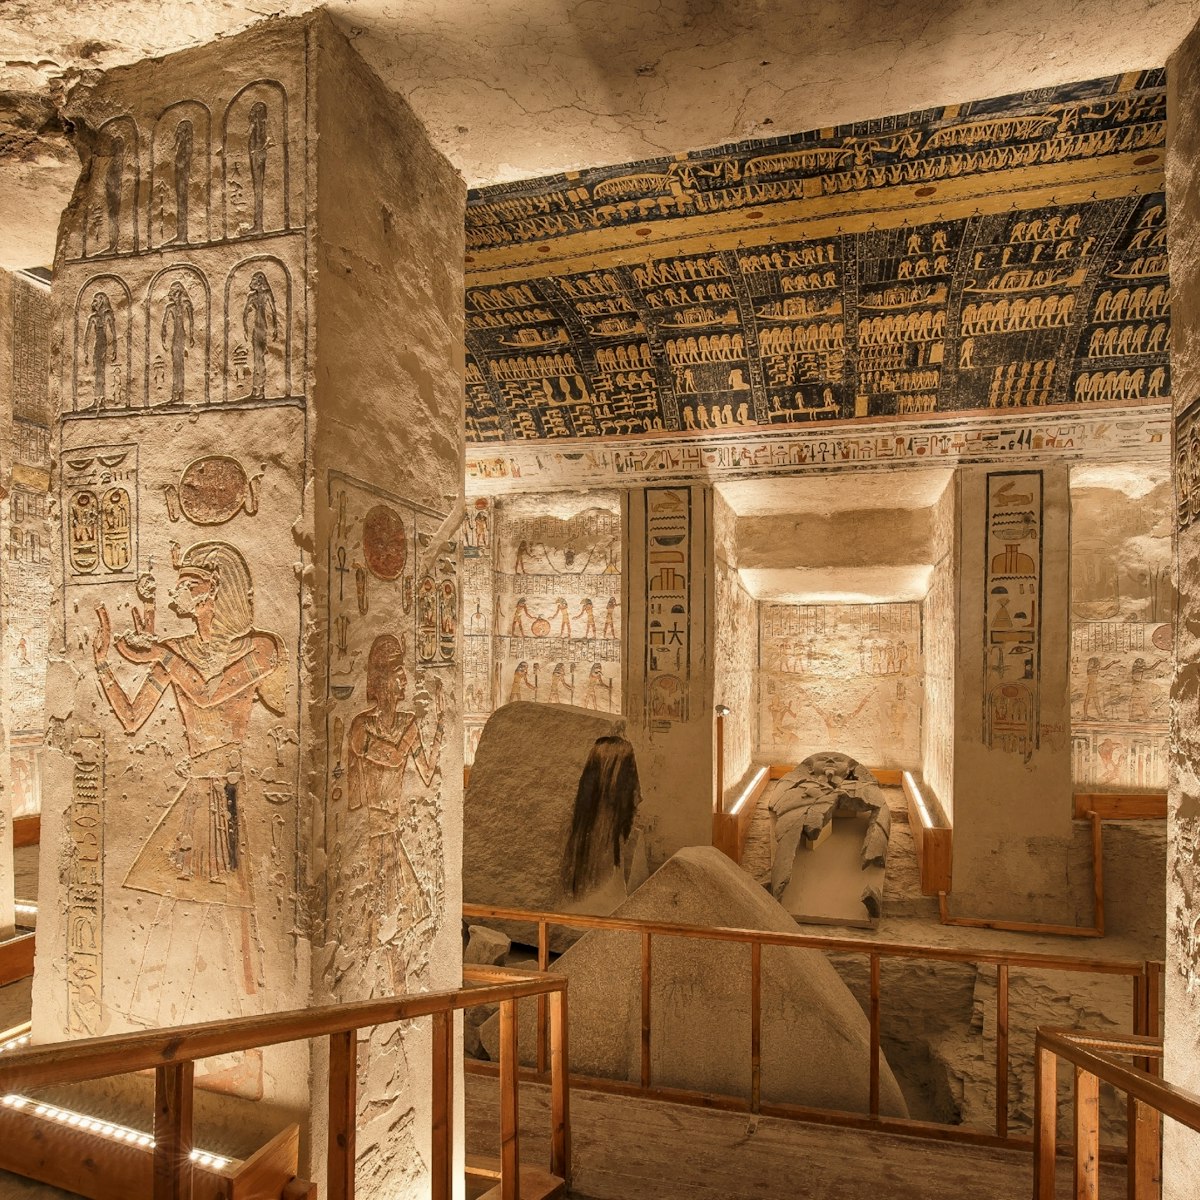 LUXOR, EGYPT - FEBRUARY 5 2016 - Unique shot of the Ramesses VI tomb in Valley of the Kings. Obtaining permission for taking images there is painstaking but worth it.; Shutterstock ID 467883101; Your name (First / Last): Lauren Keith; GL account no.: 65050; Netsuite department name: Online Editorial; Full Product or Project name including edition: Luxor Guides app update